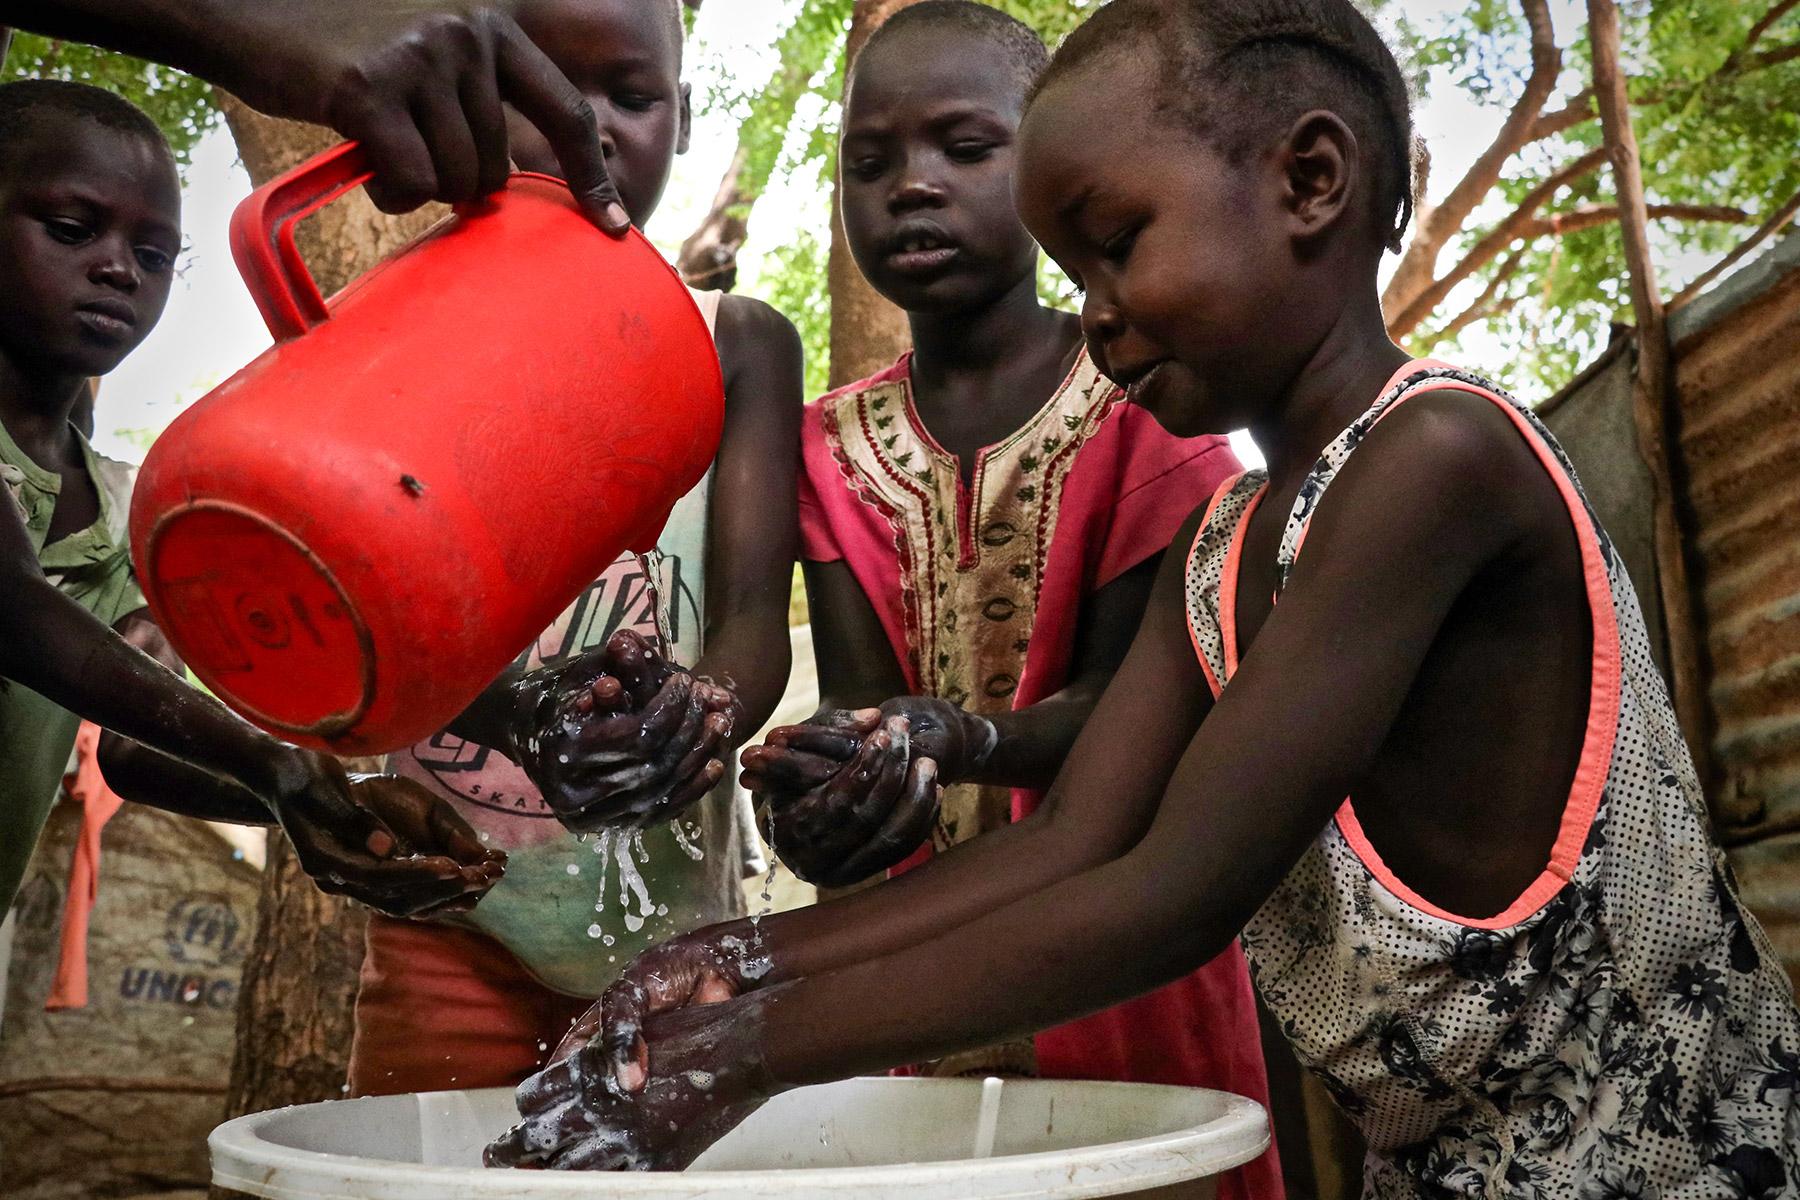 Children demonstrate hand washing at Kakuma refugee camp, Kenya. The LWF is the main implementer of education in the camp, and awareness-raising on hygiene is part of that work. The LWF has reinforced hygiene education to prevent the spread of COVID-19 in the camp. Photo: LWF/P. Omagwa